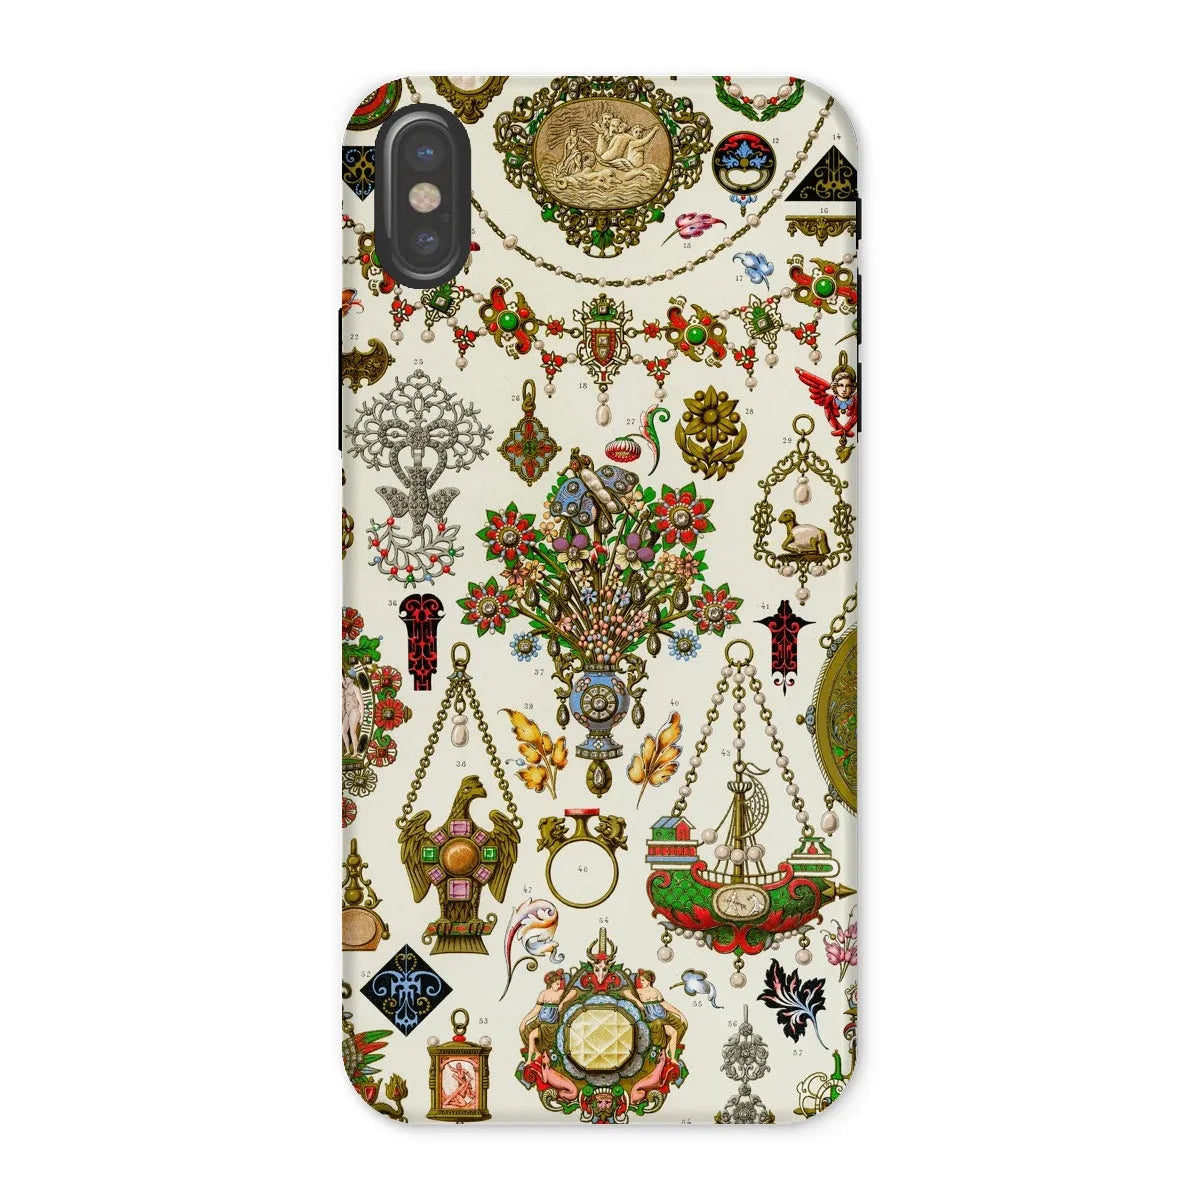 French Jewelry By Auguste Racinet Tough Phone Case - Iphone x / Matte - Mobile Phone Cases - Aesthetic Art